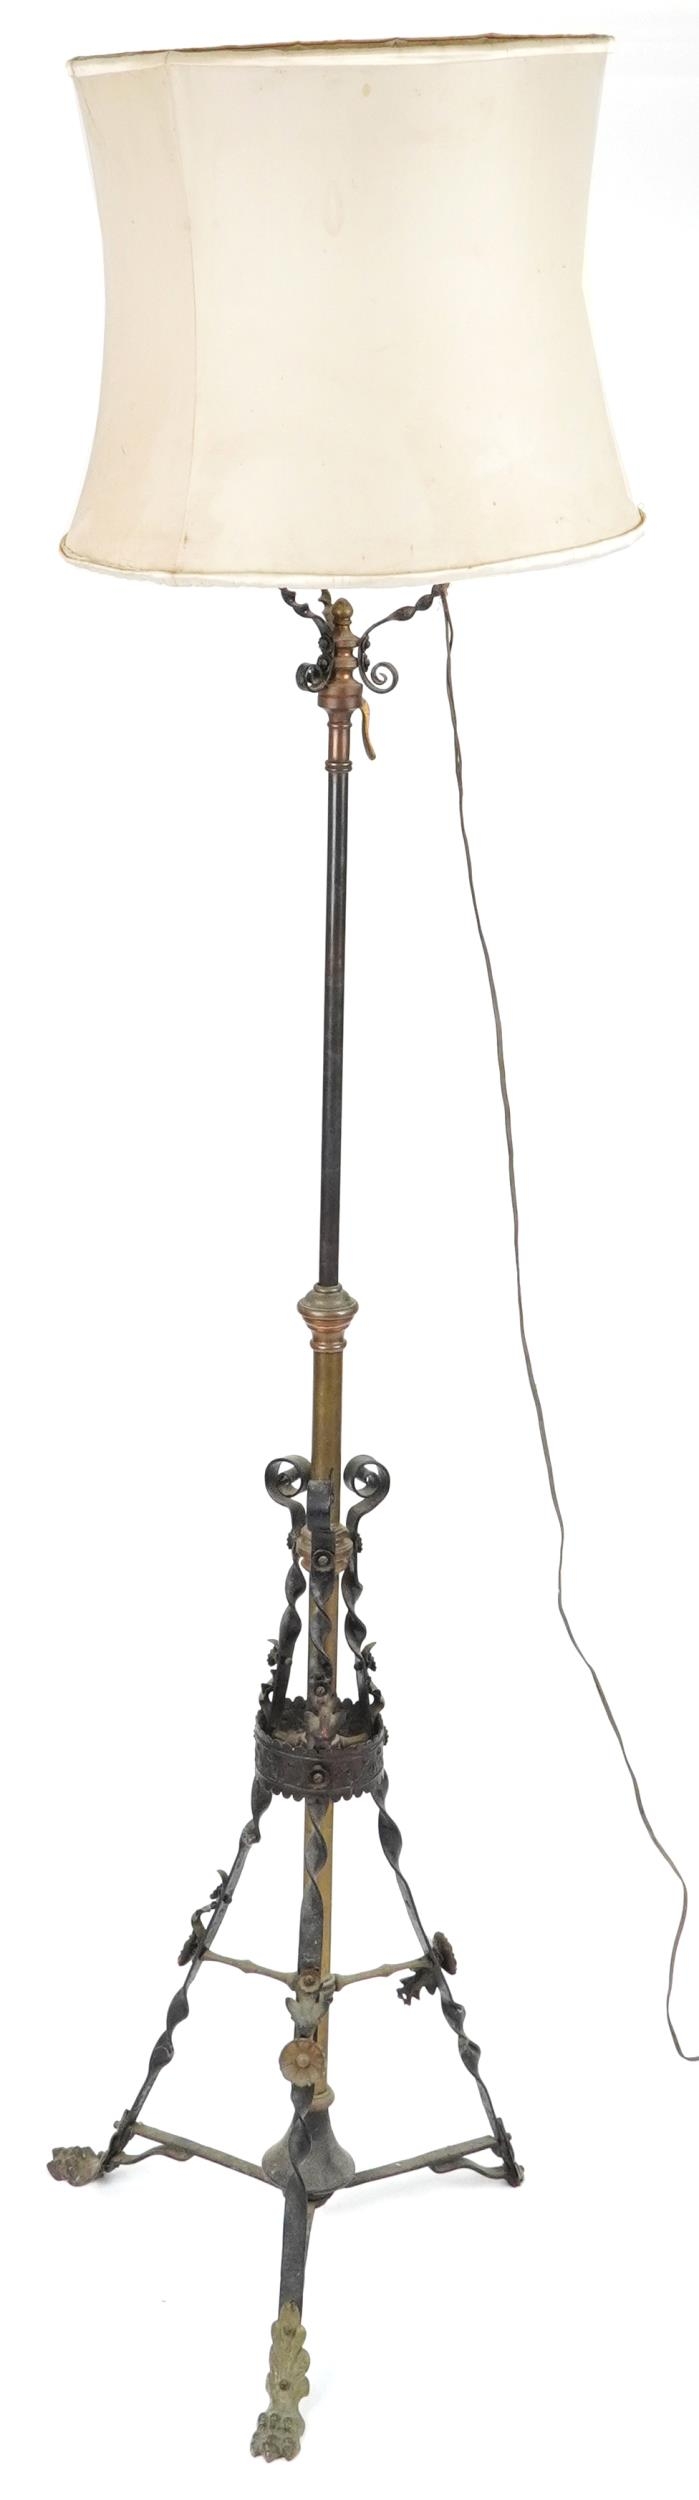 Victorian aesthetic iron and brass adjustable oil lamp converted for electric use, 195cm high - Image 2 of 2